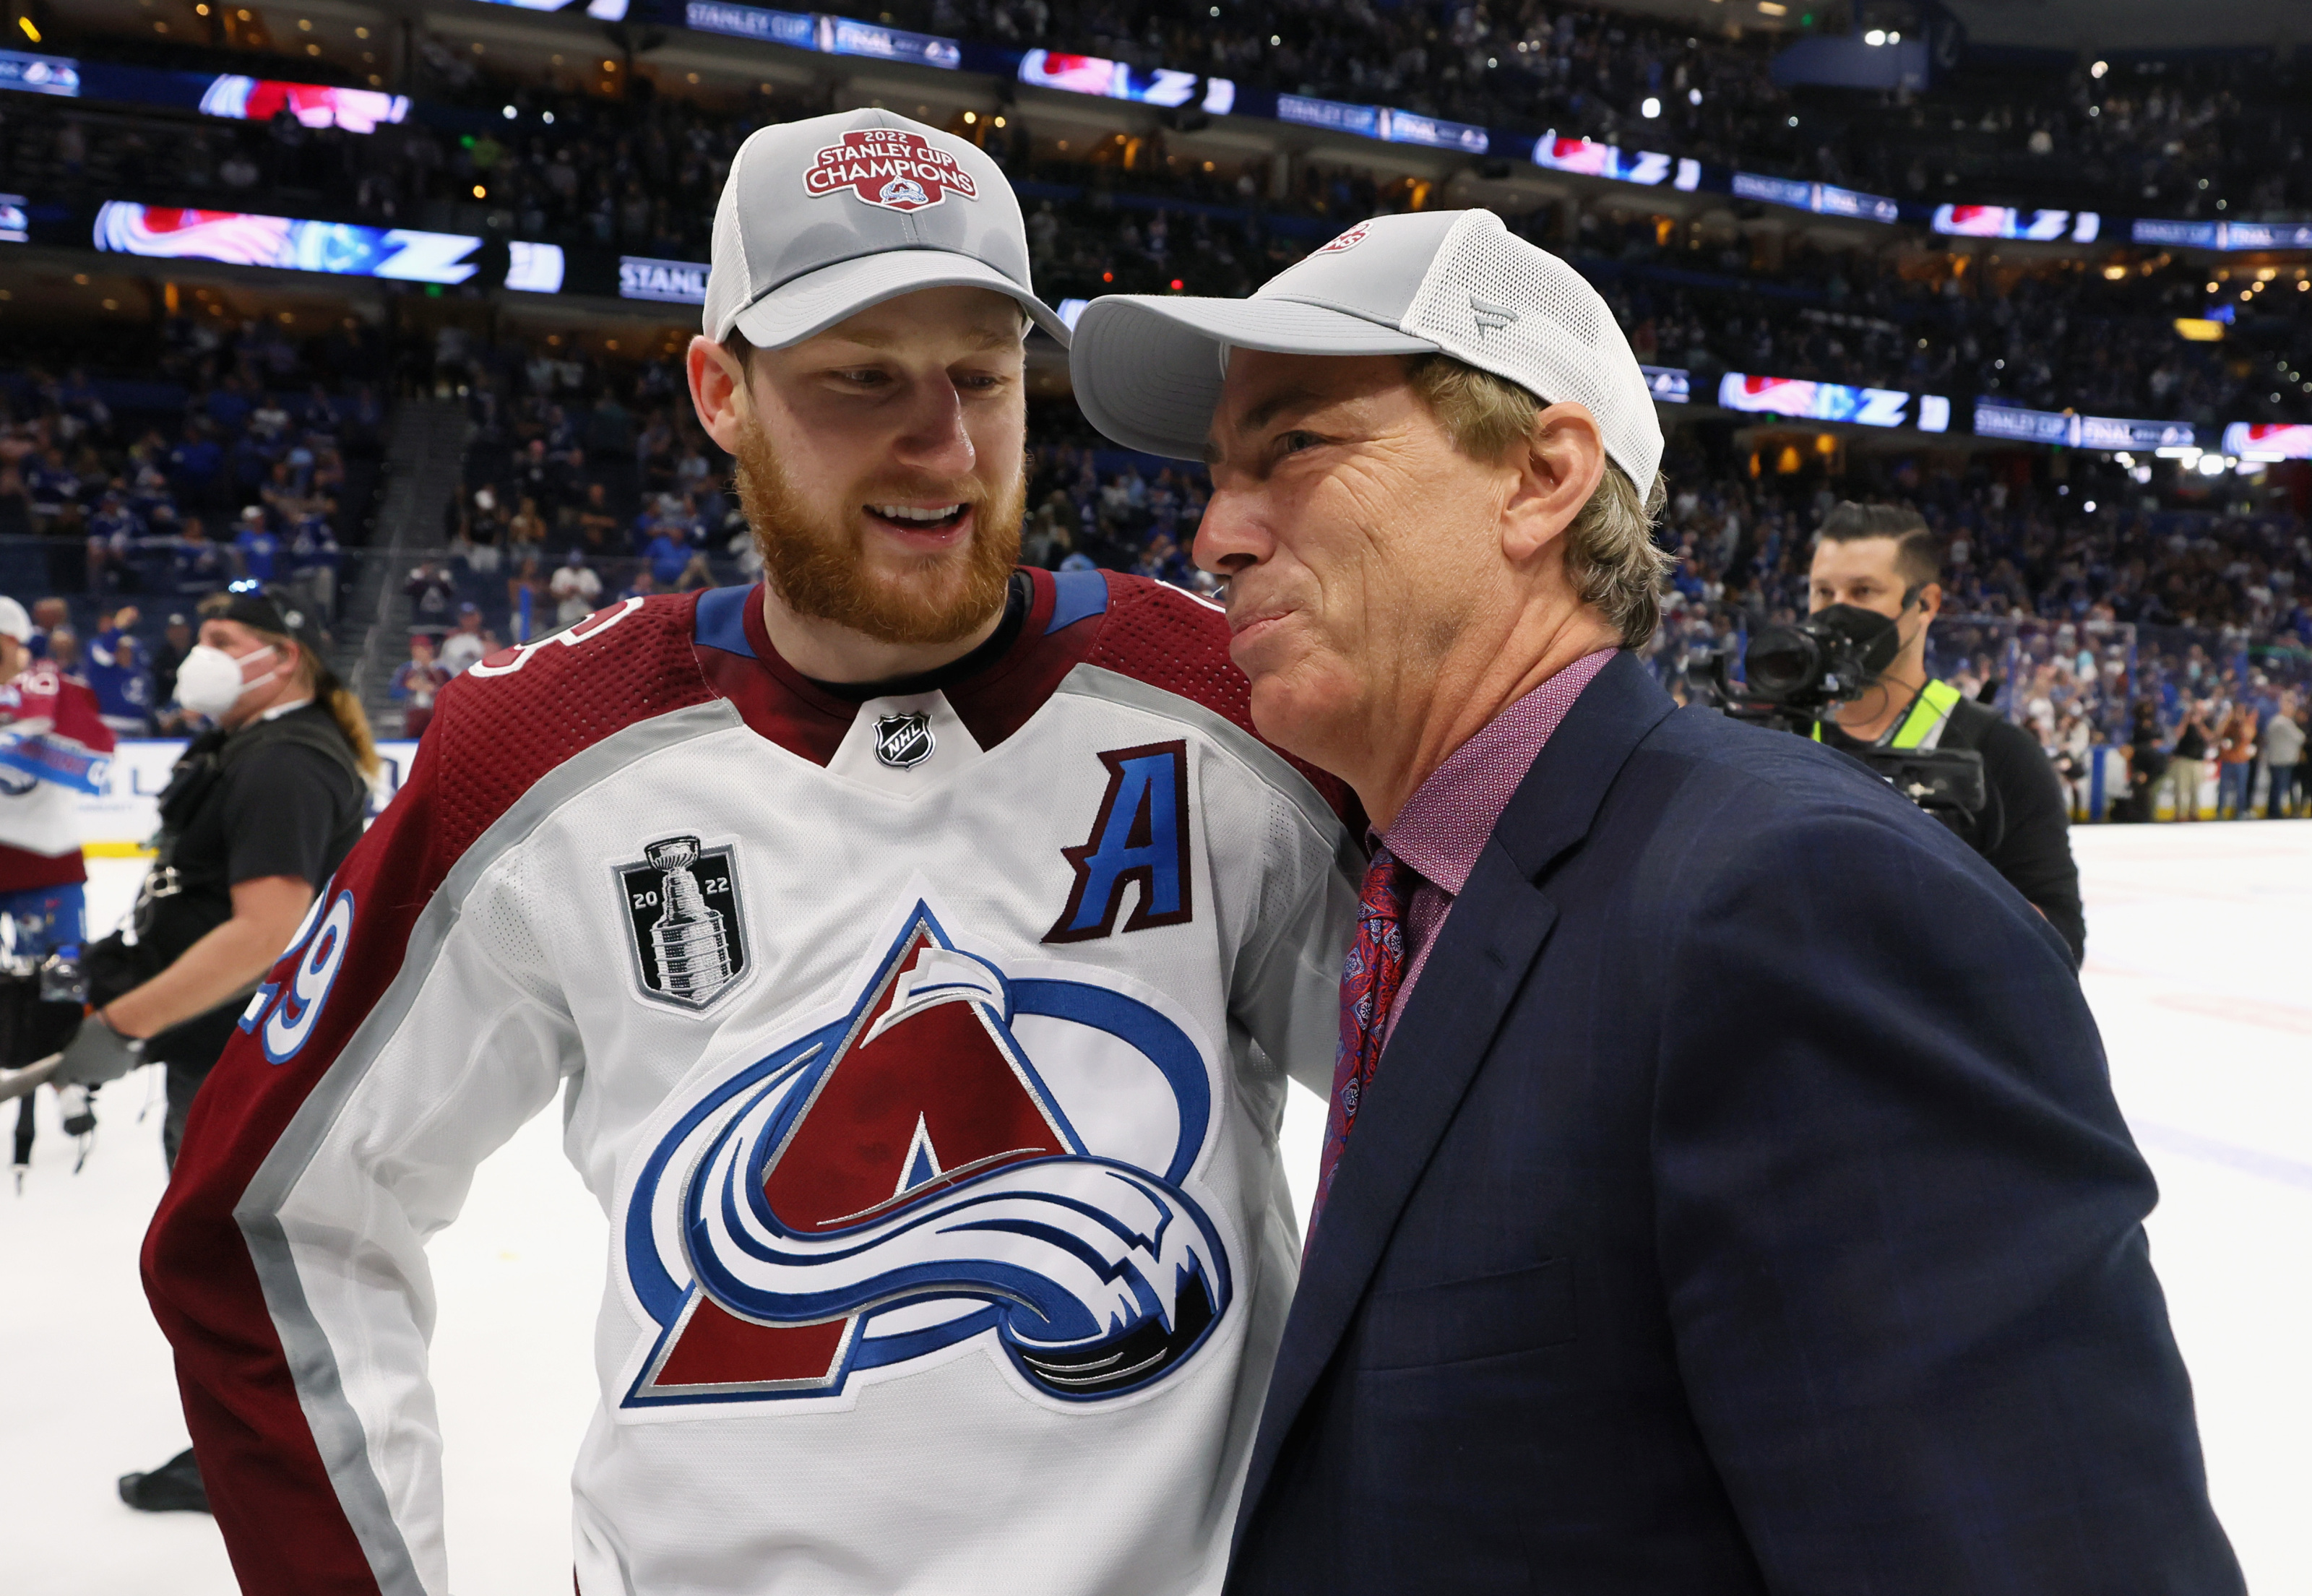 Avalanche's Nathan MacKinnon, Cale Makar headed to 2022 All-Star Game